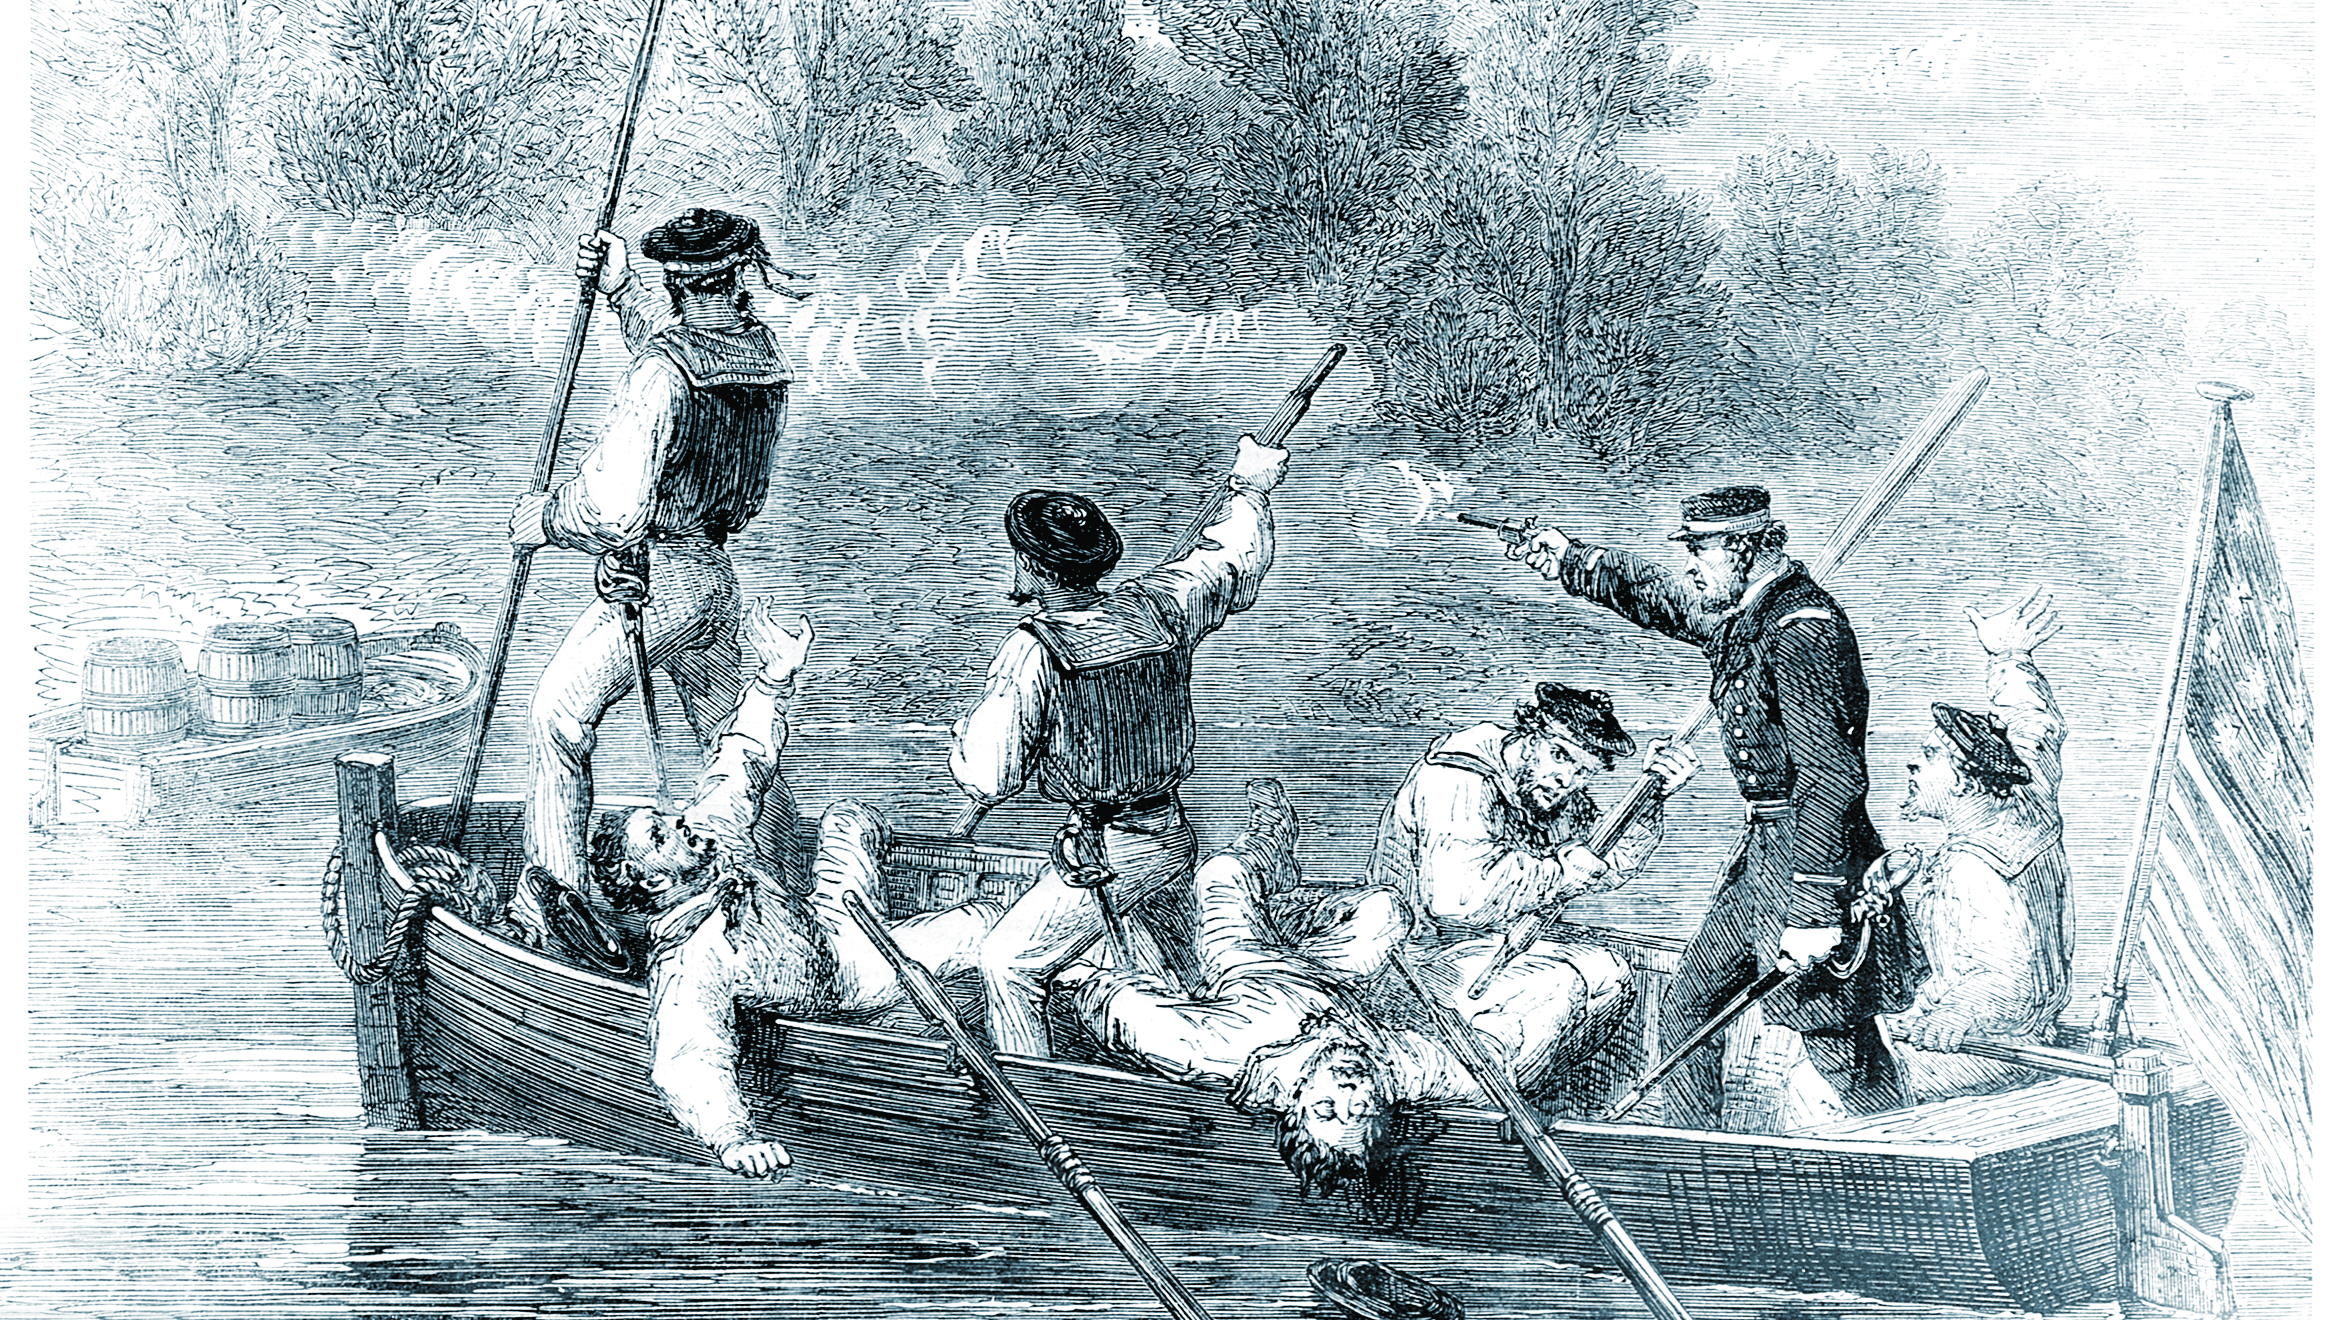 Ambushes by Confederate forces, as depicted in this Illustrated London News sketch, were a common concern for Union boat crews early in teh war. (Naval History and Heritage Command)